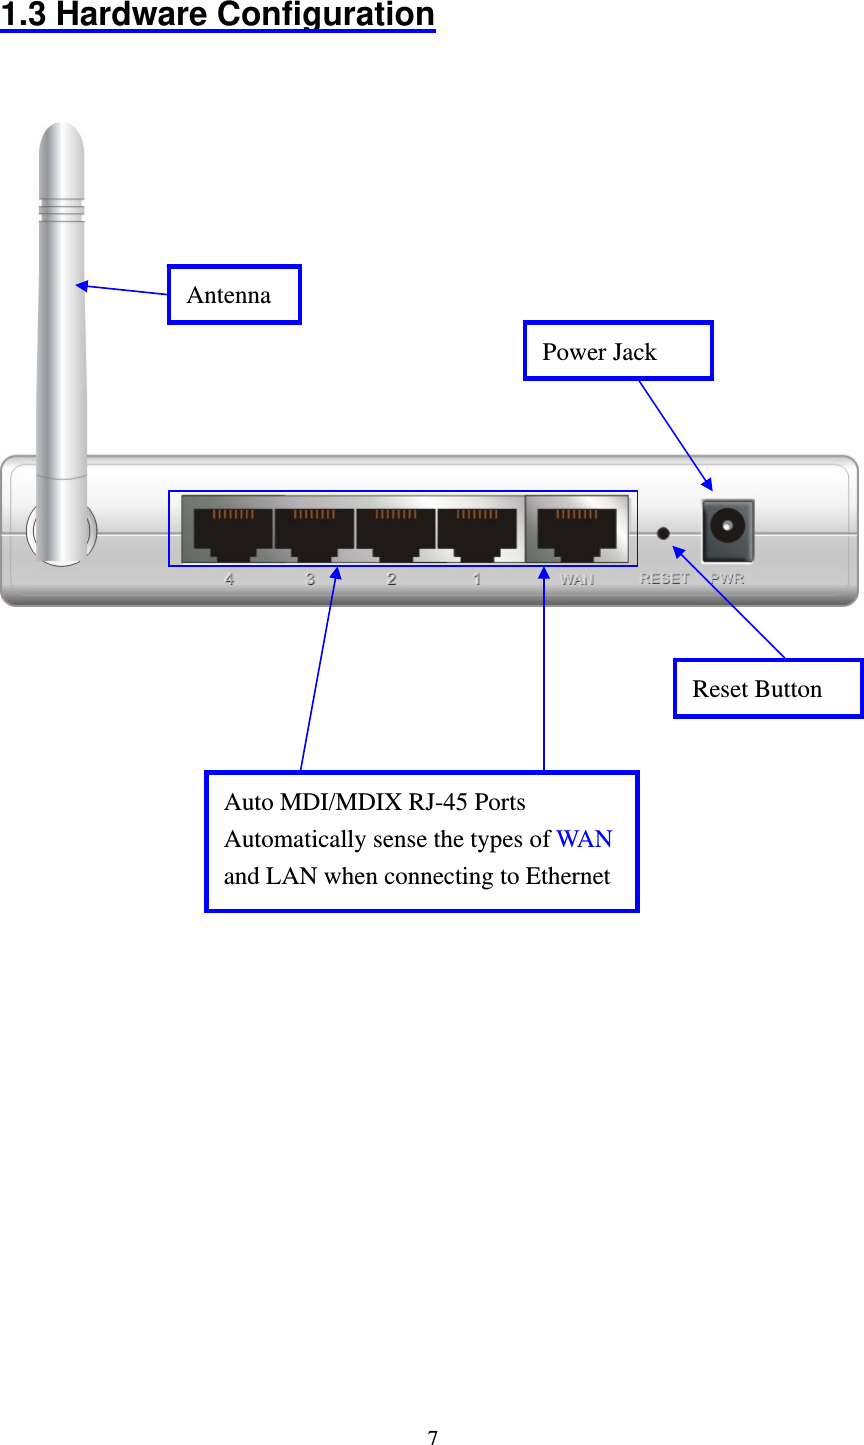  7 1.3 Hardware Configuration                Auto MDI/MDIX RJ-45 Ports Automatically sense the types of WAN and LAN when connecting to Ethernet Reset Button Antenna Power Jack 